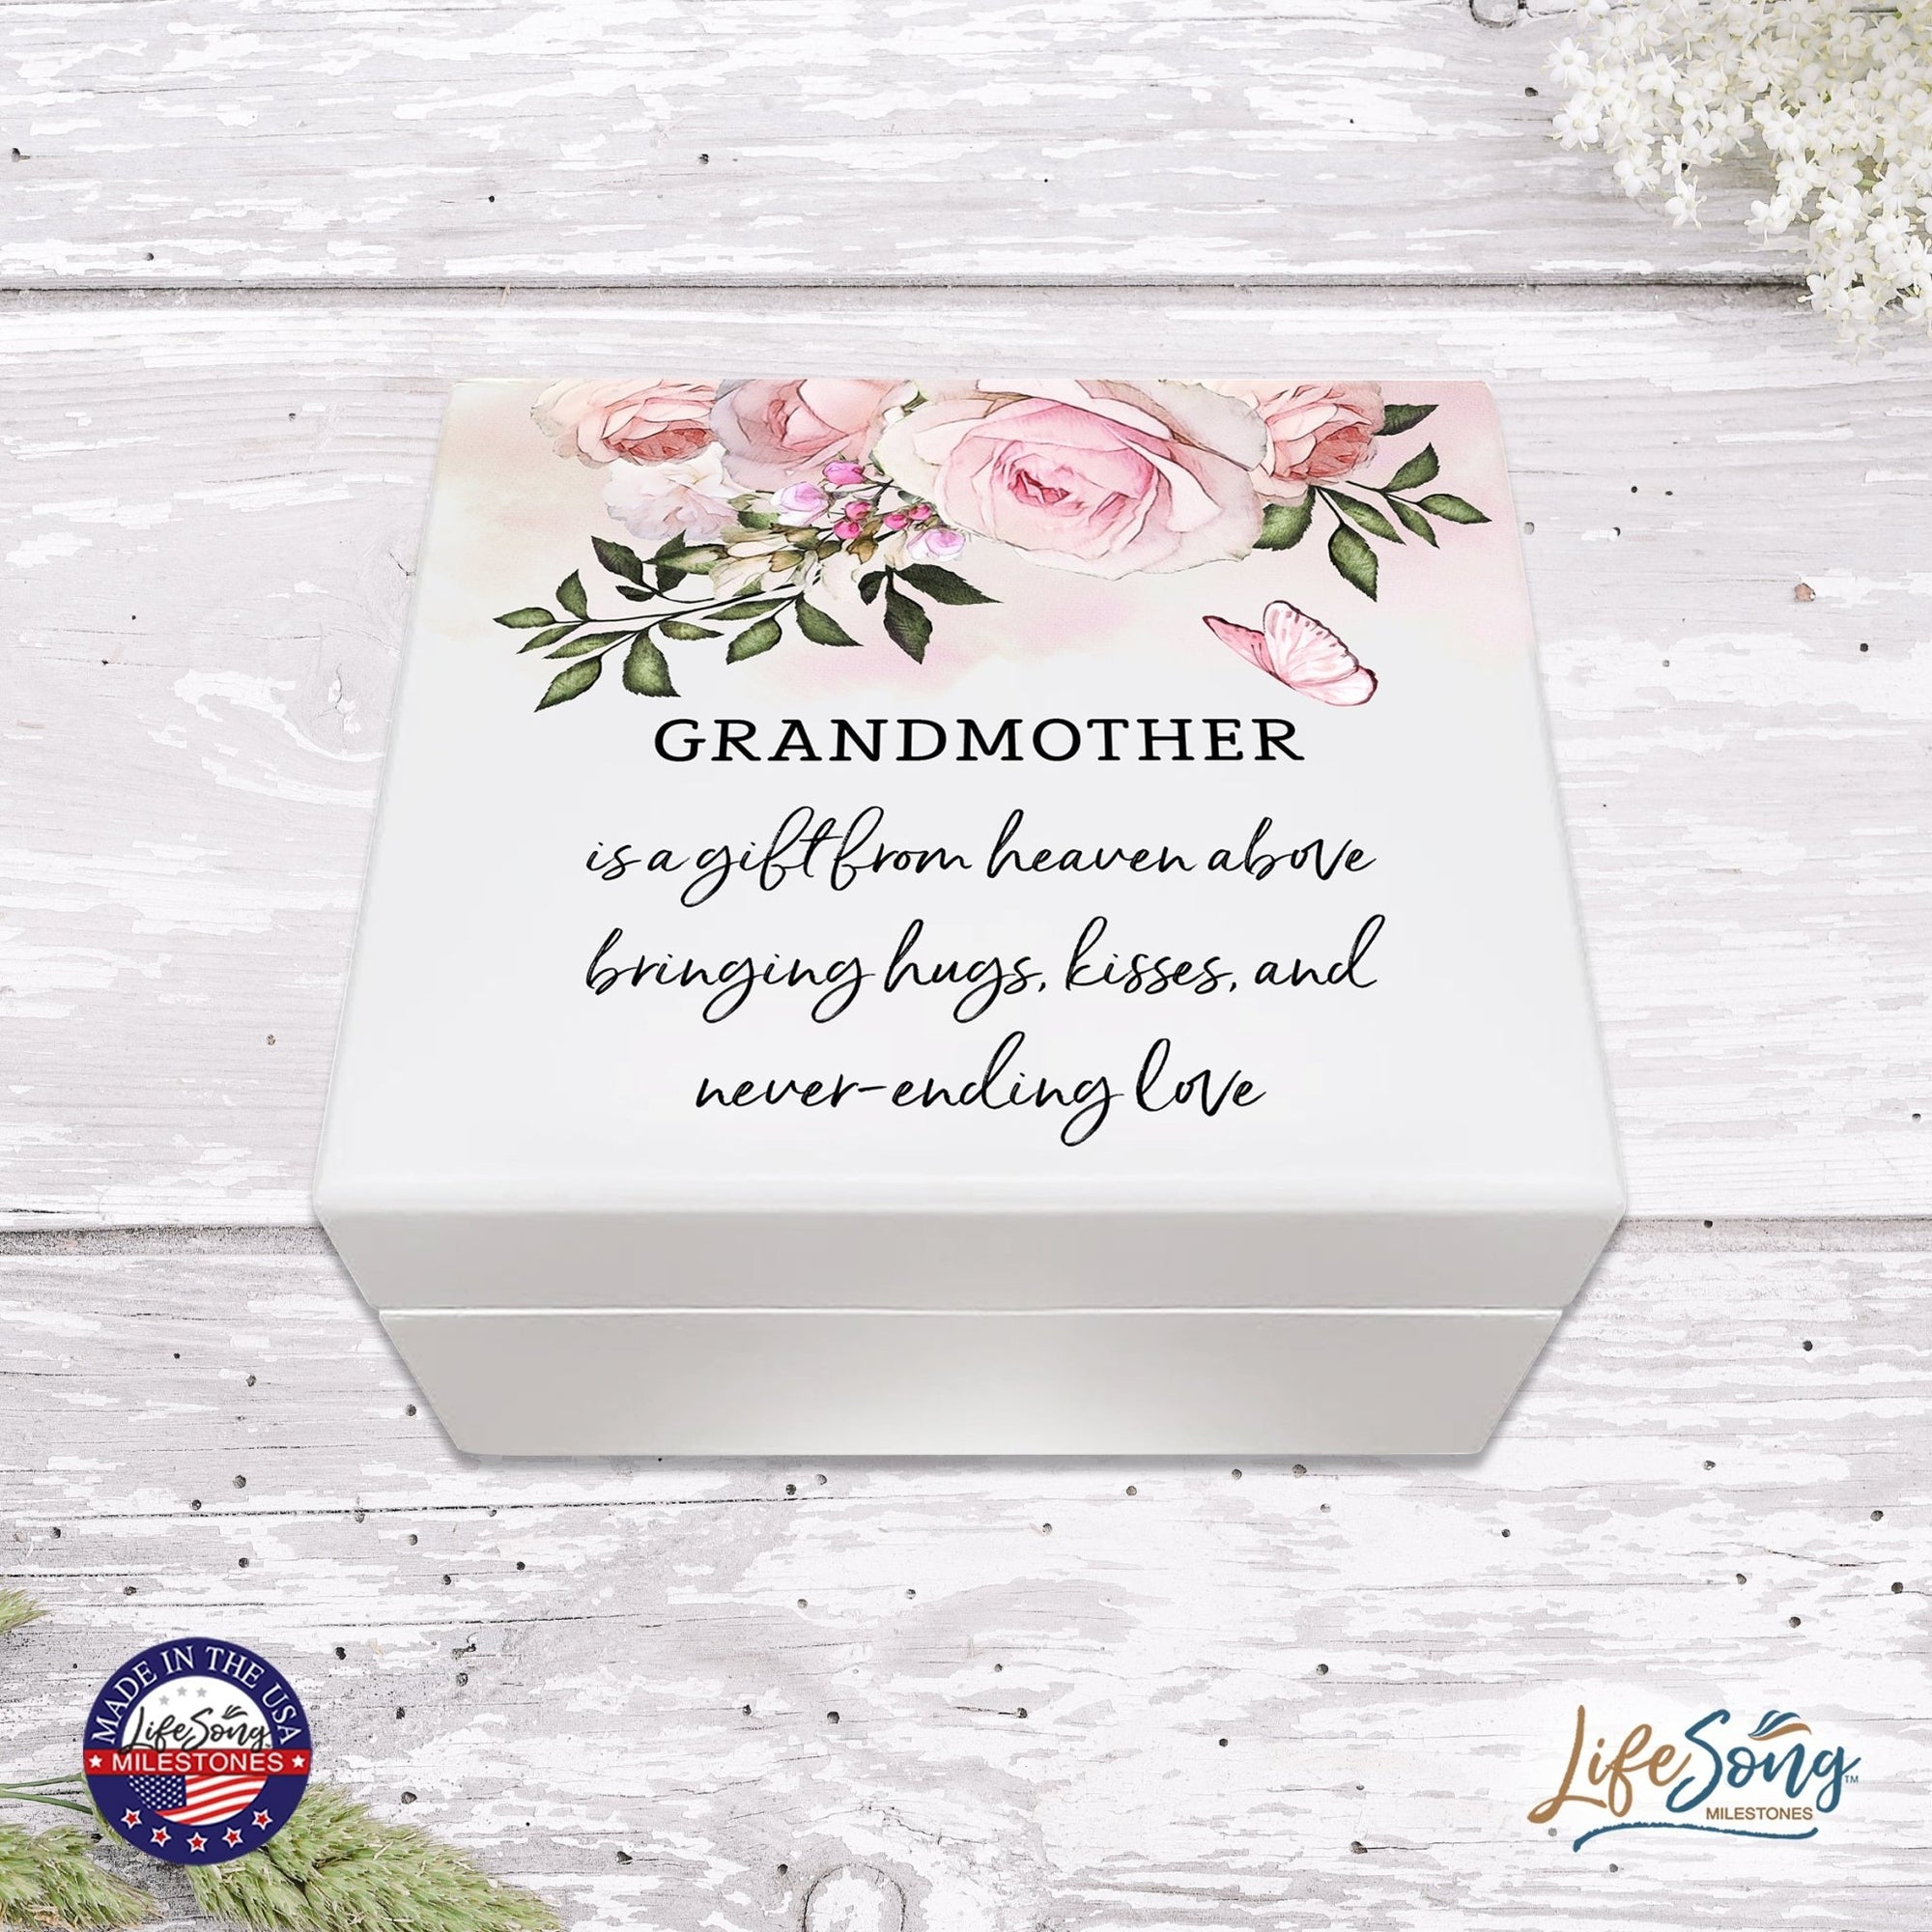 Jewelry Keepsake Box for Grandmother 6x5.5in - Grandmother, A Gift From Abovd - LifeSong Milestones